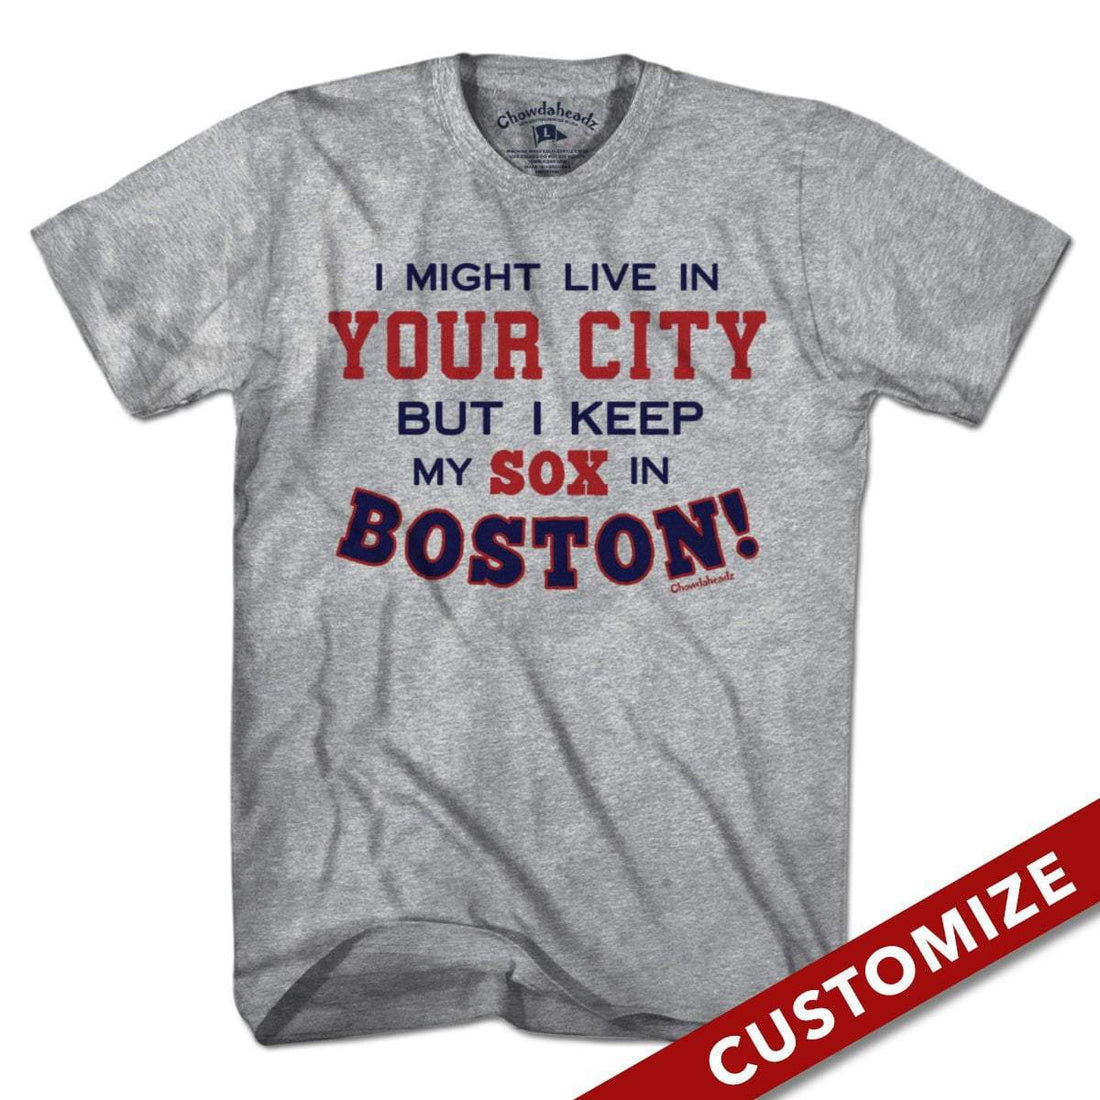  I Might Live In (FILL IN) But I Keep My Sox In Boston T-Shirt - Chowdaheadz